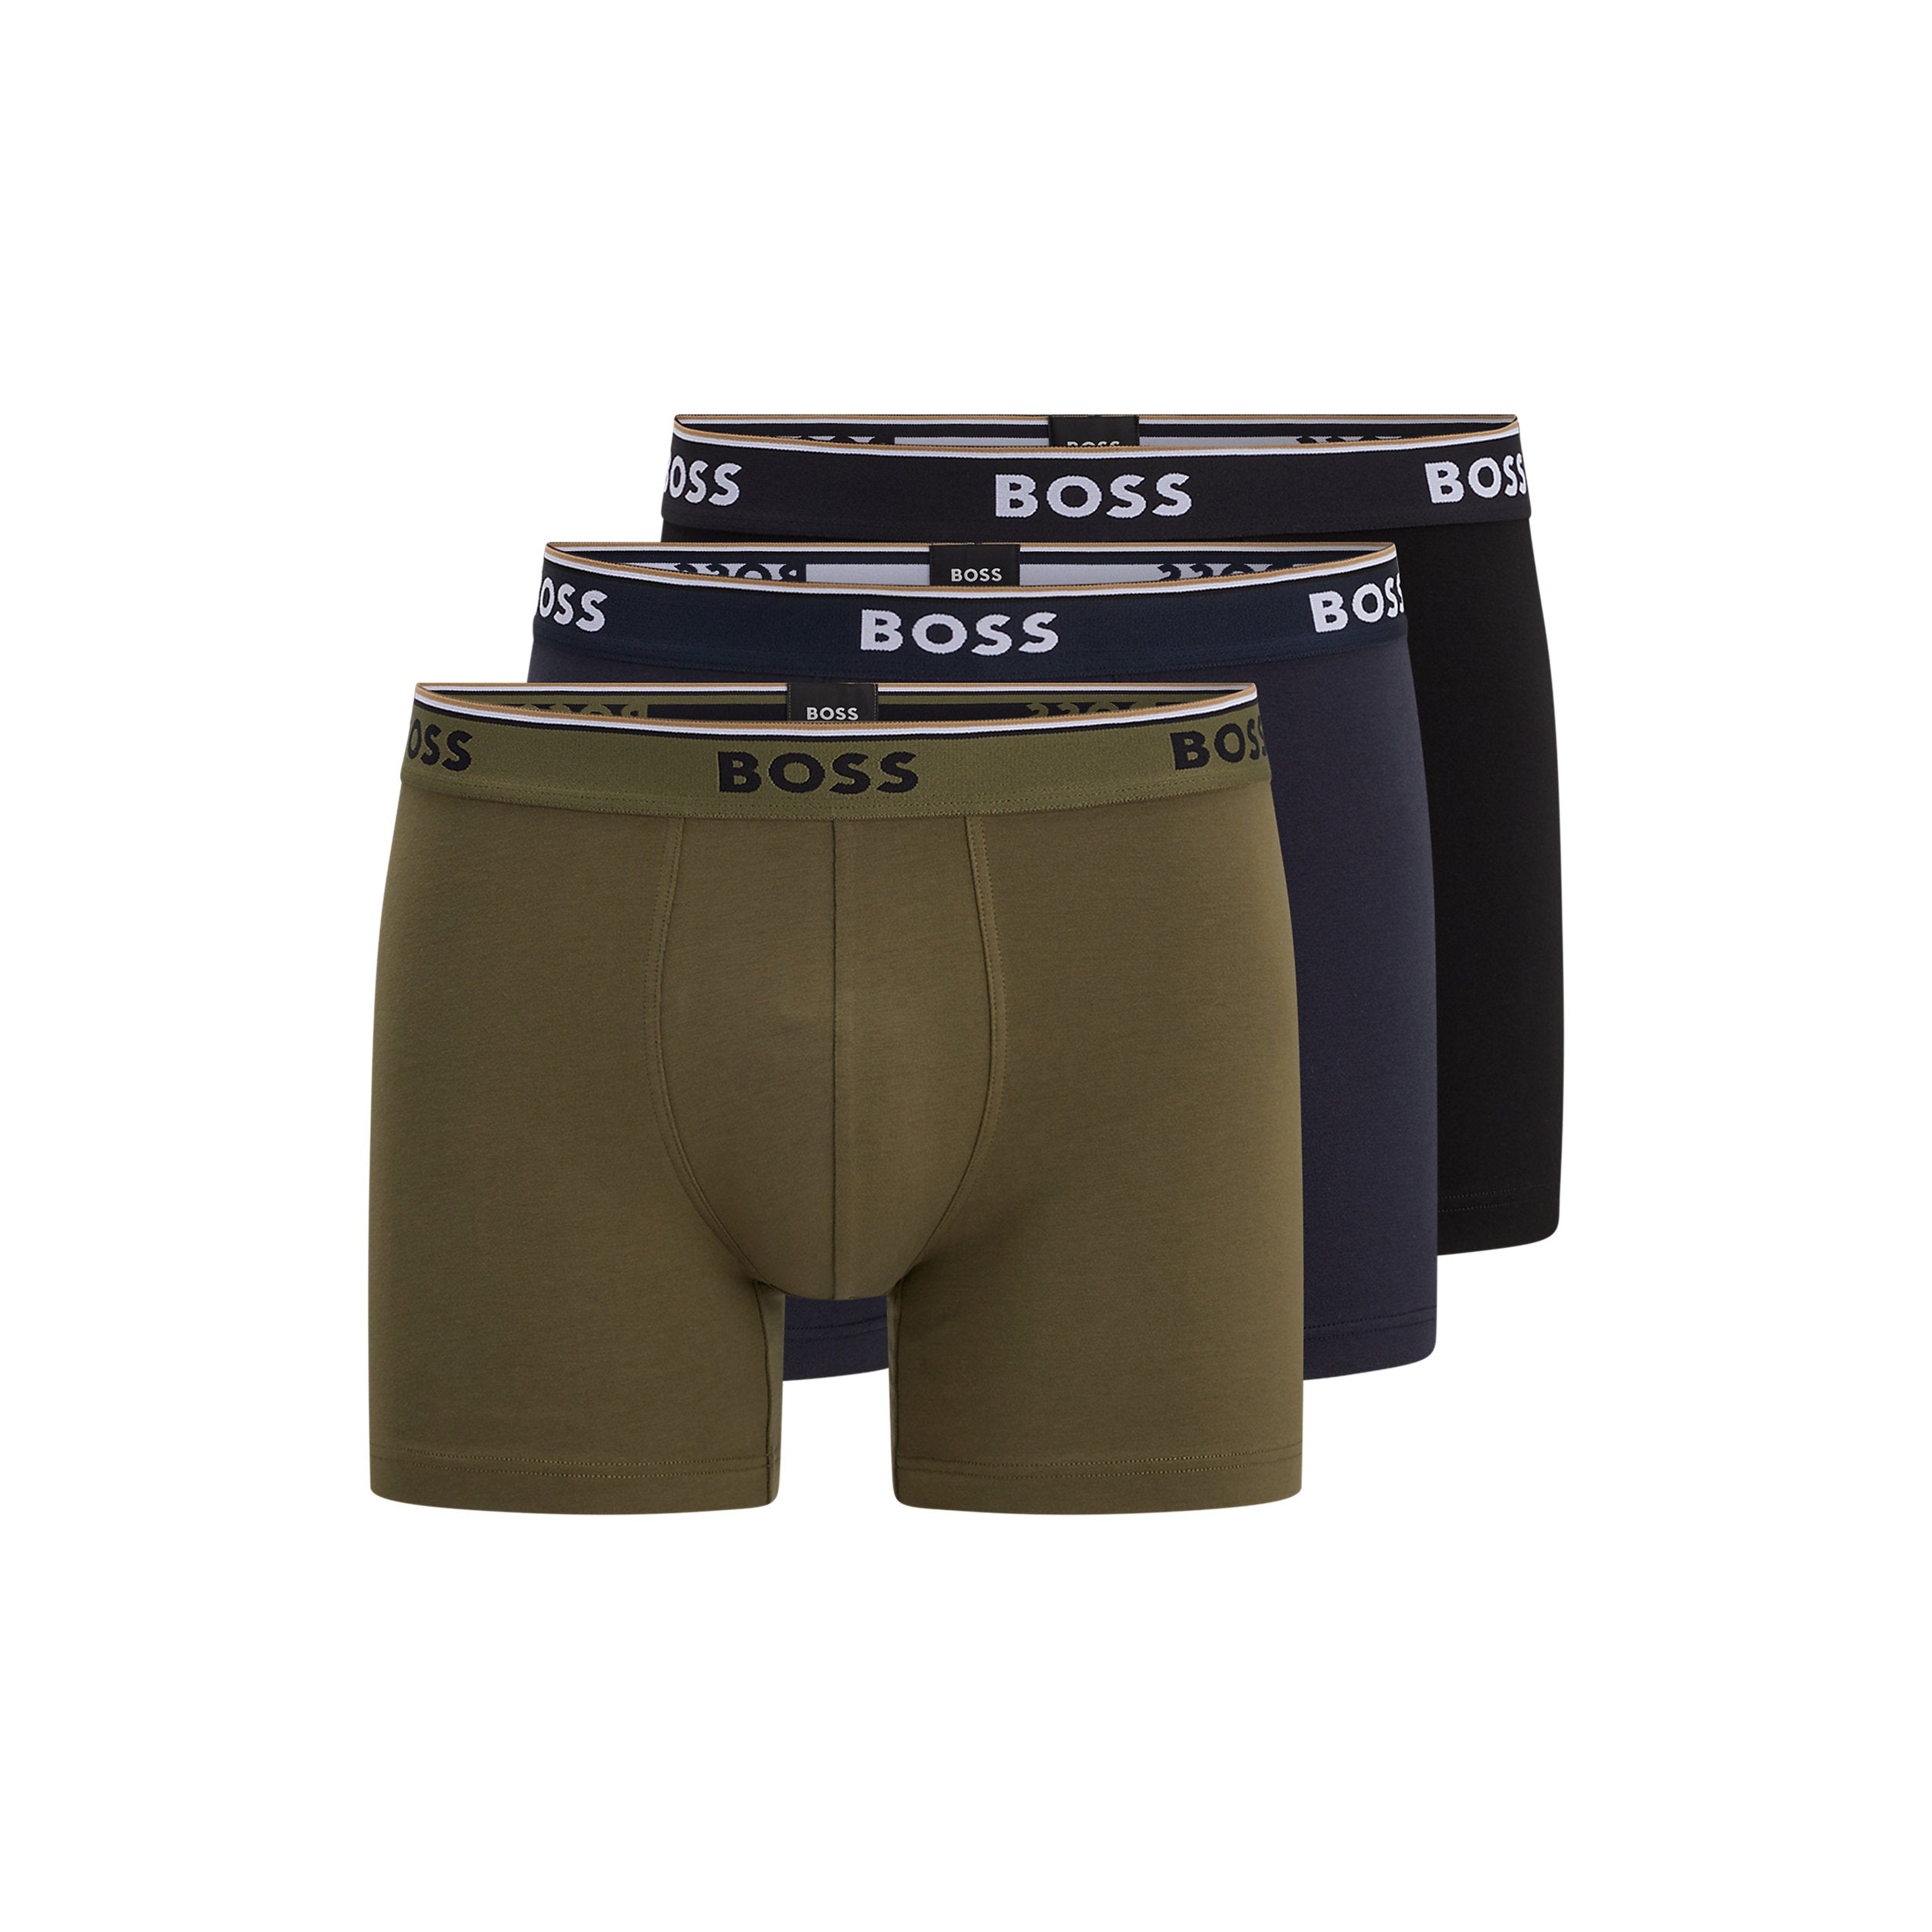 BOSS - 3-Pack of Boxer Briefs in Navy, Black and Khaki 50479121 968